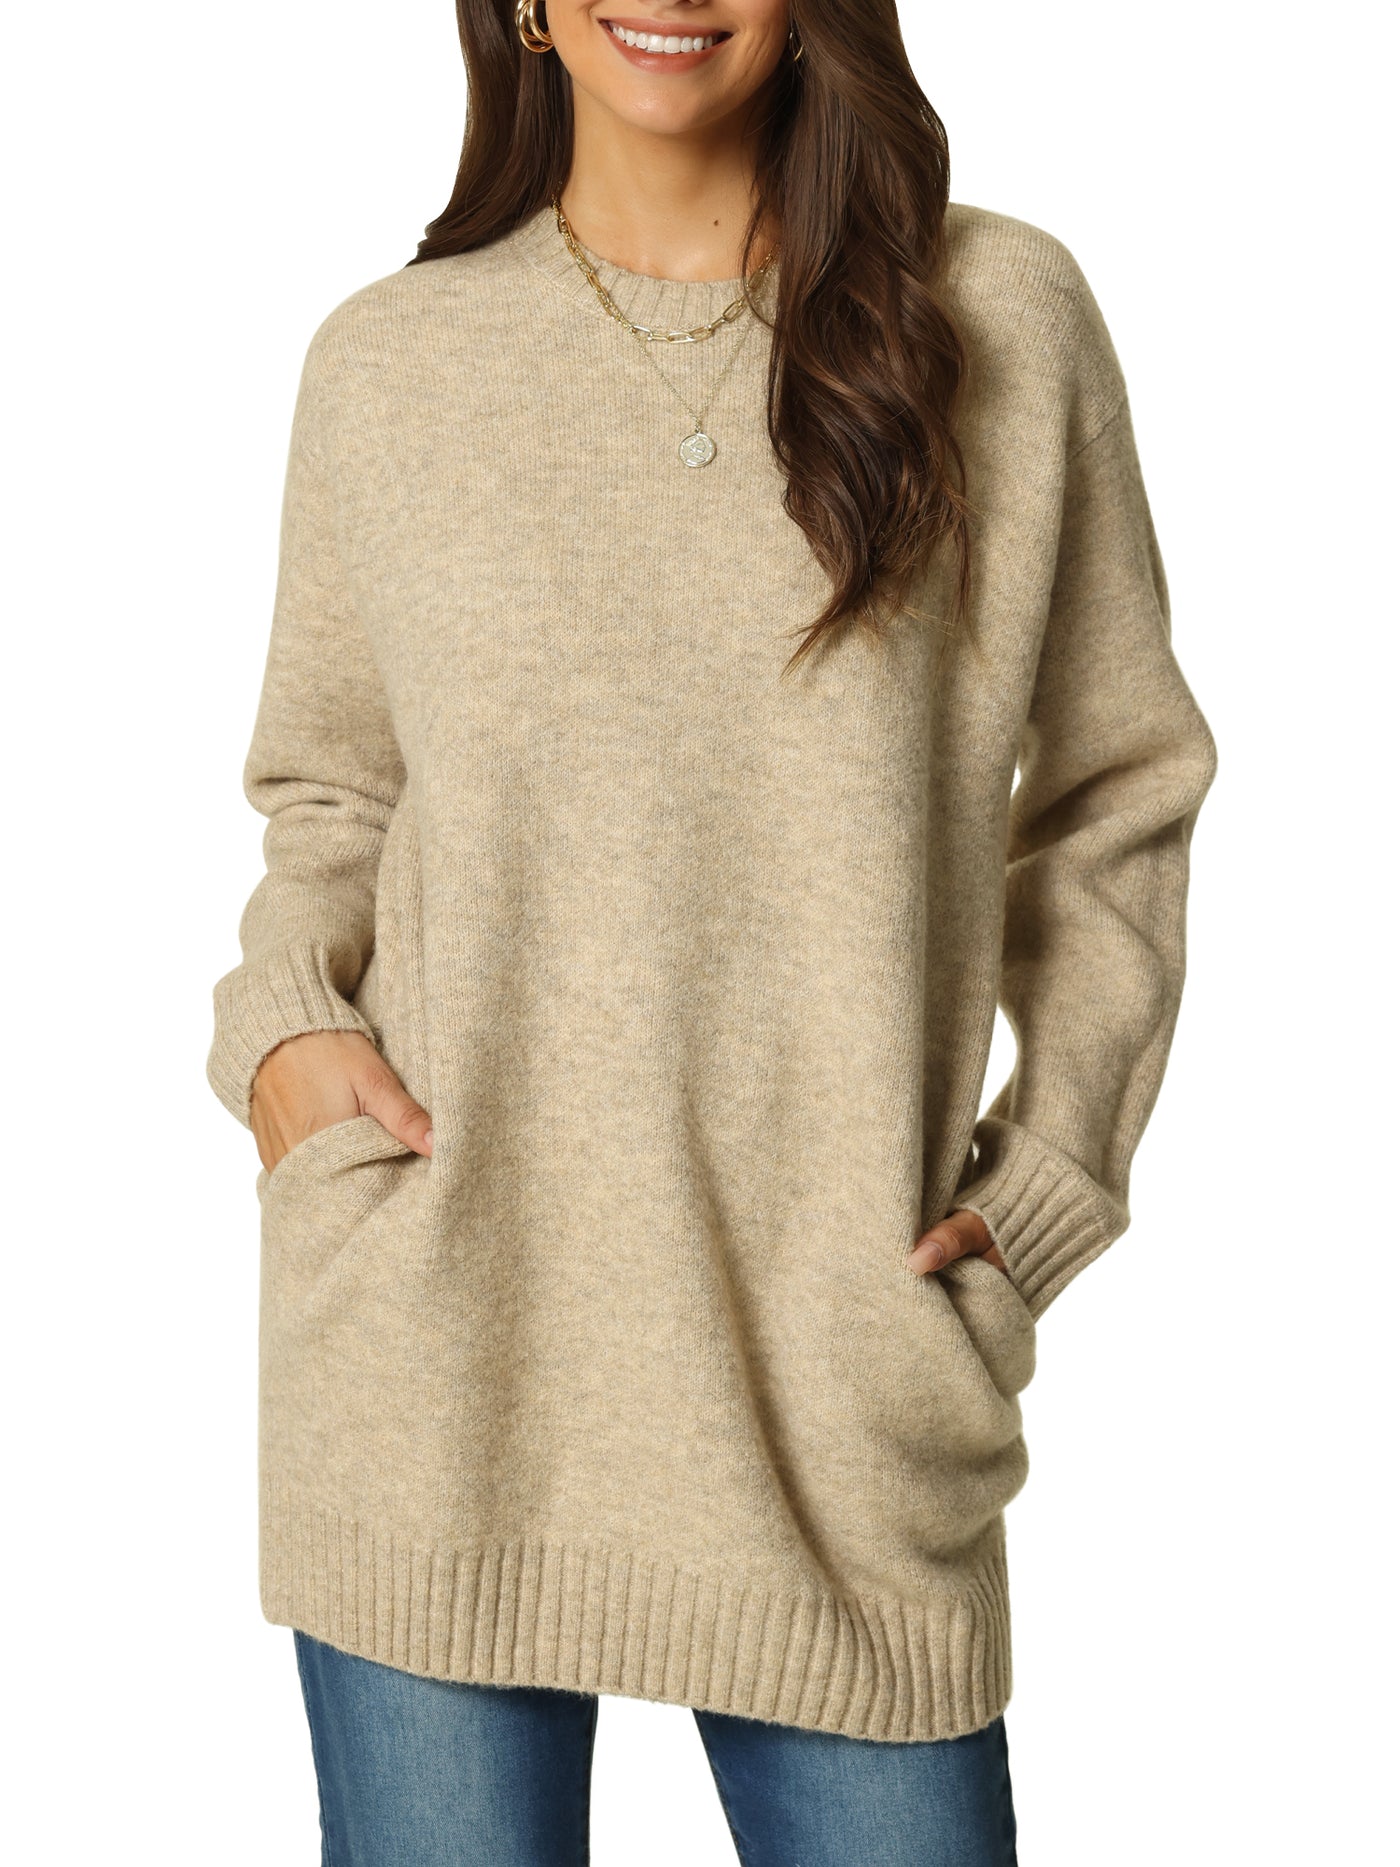 Bublédon Womens' Fall Winter Round Neck Long Sleeve Casual Sweater with Pockets